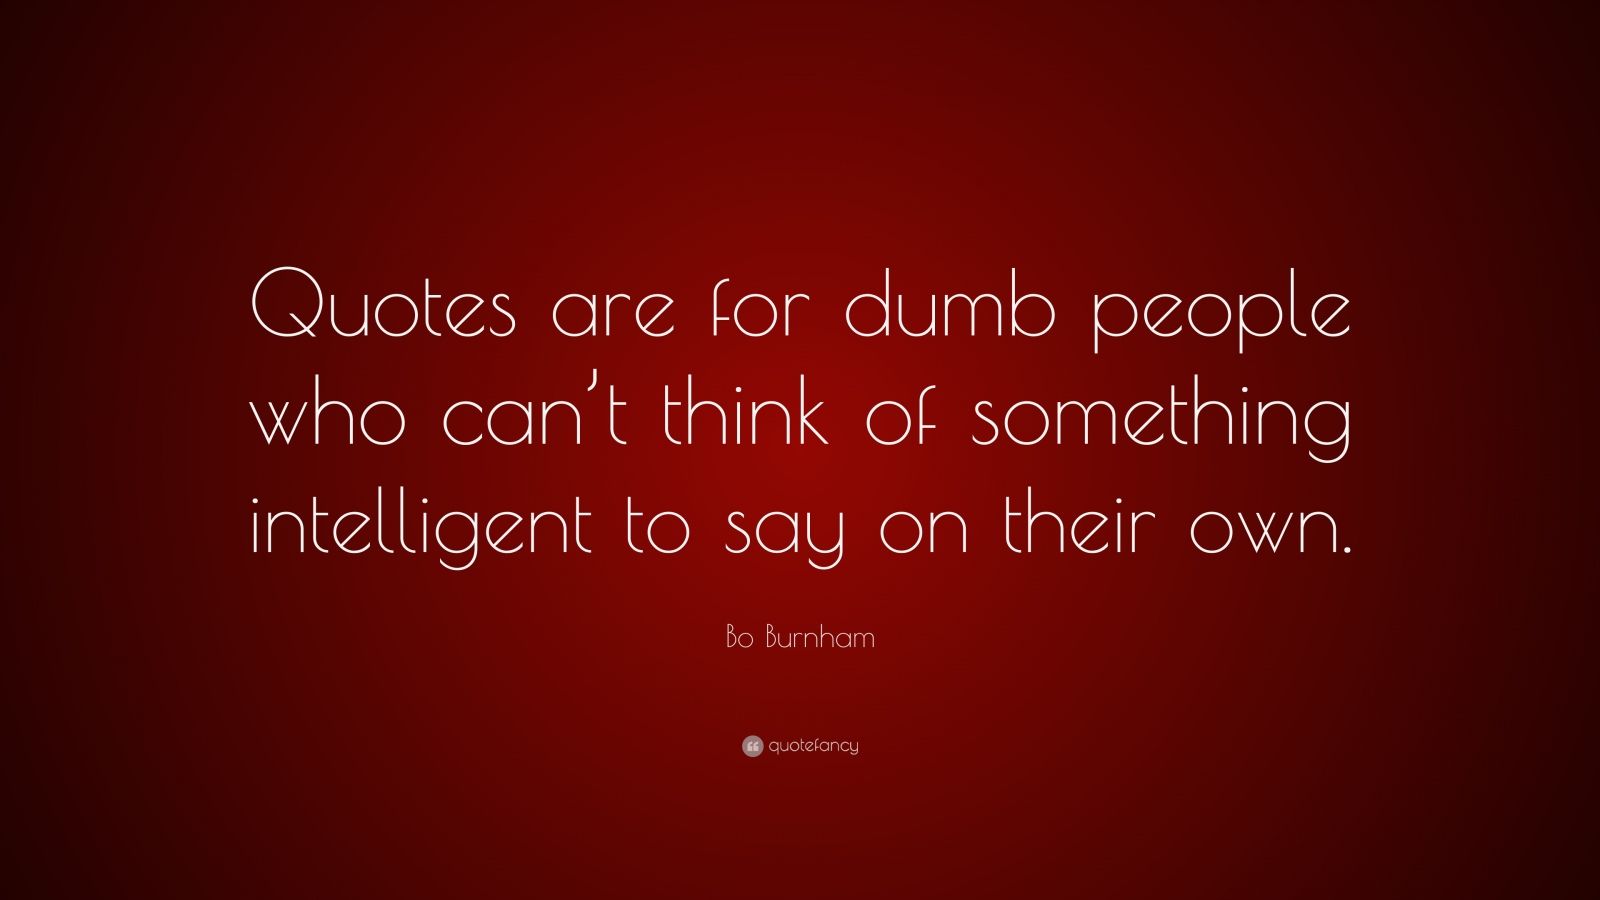 Bo Burnham Quote: “Quotes are for dumb people who can't think of something intelligent to say on their own.”